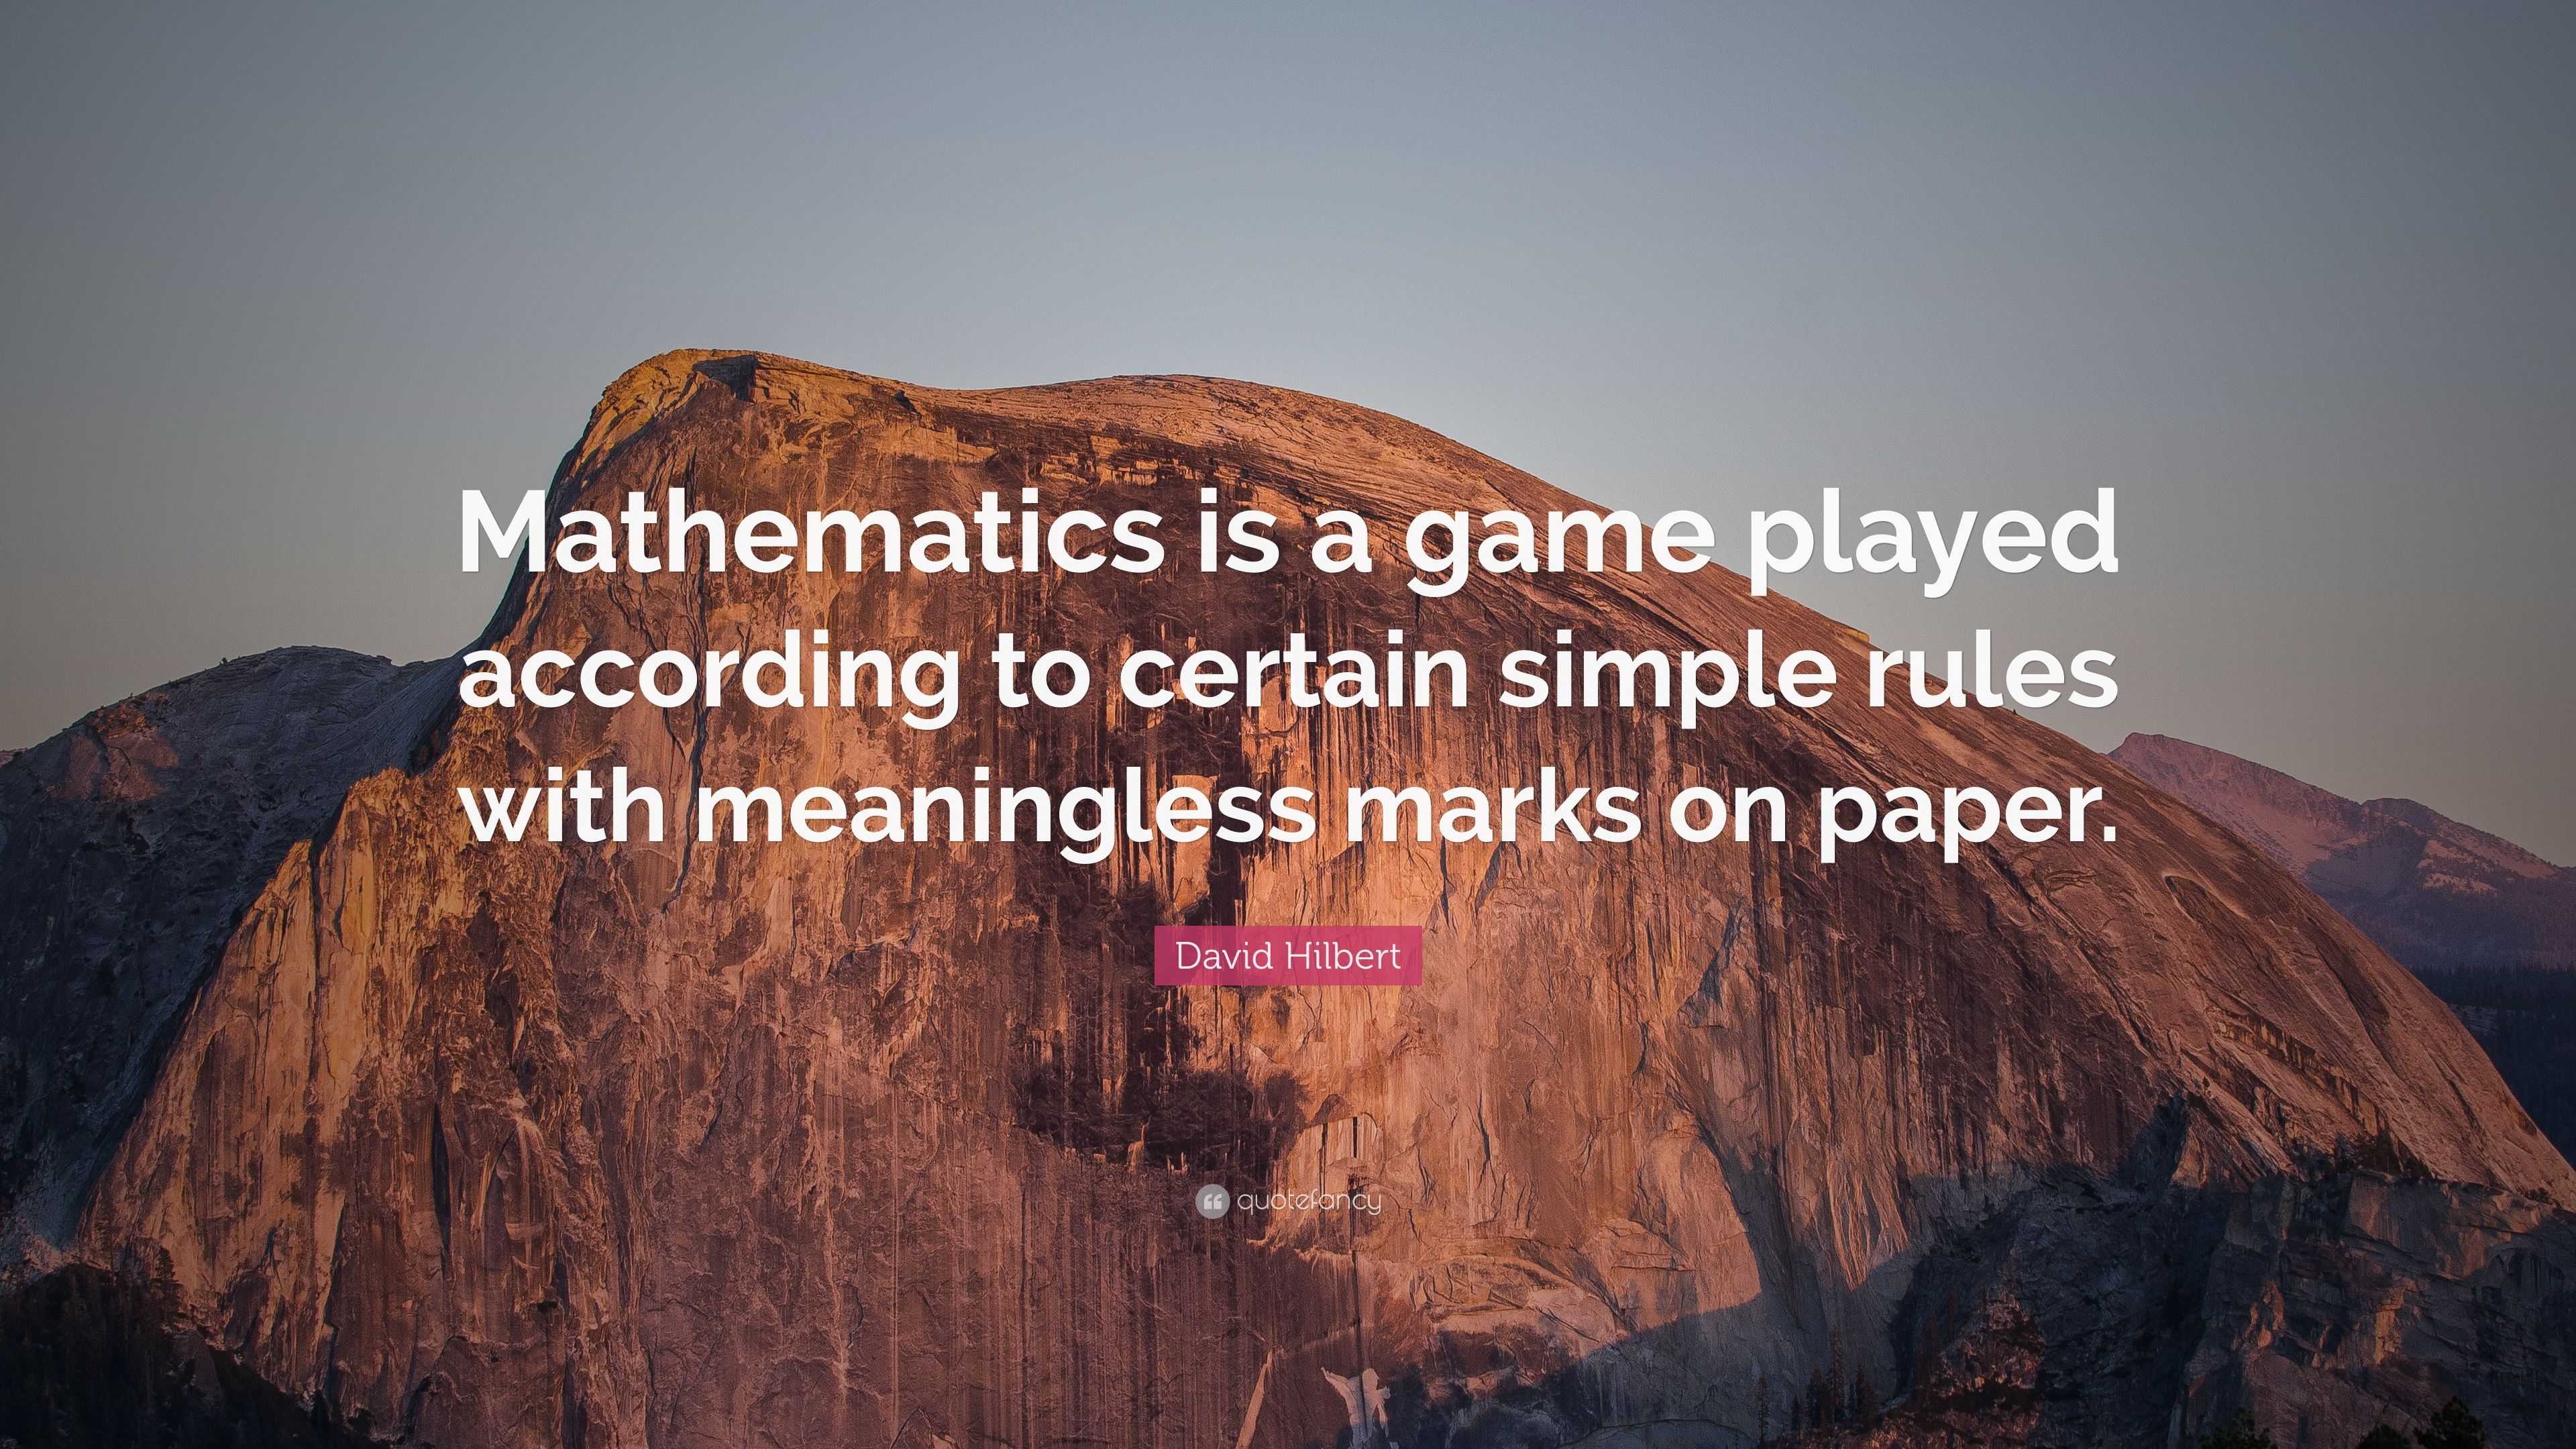 David Hilbert Quote: “Mathematics is a game played according to certain